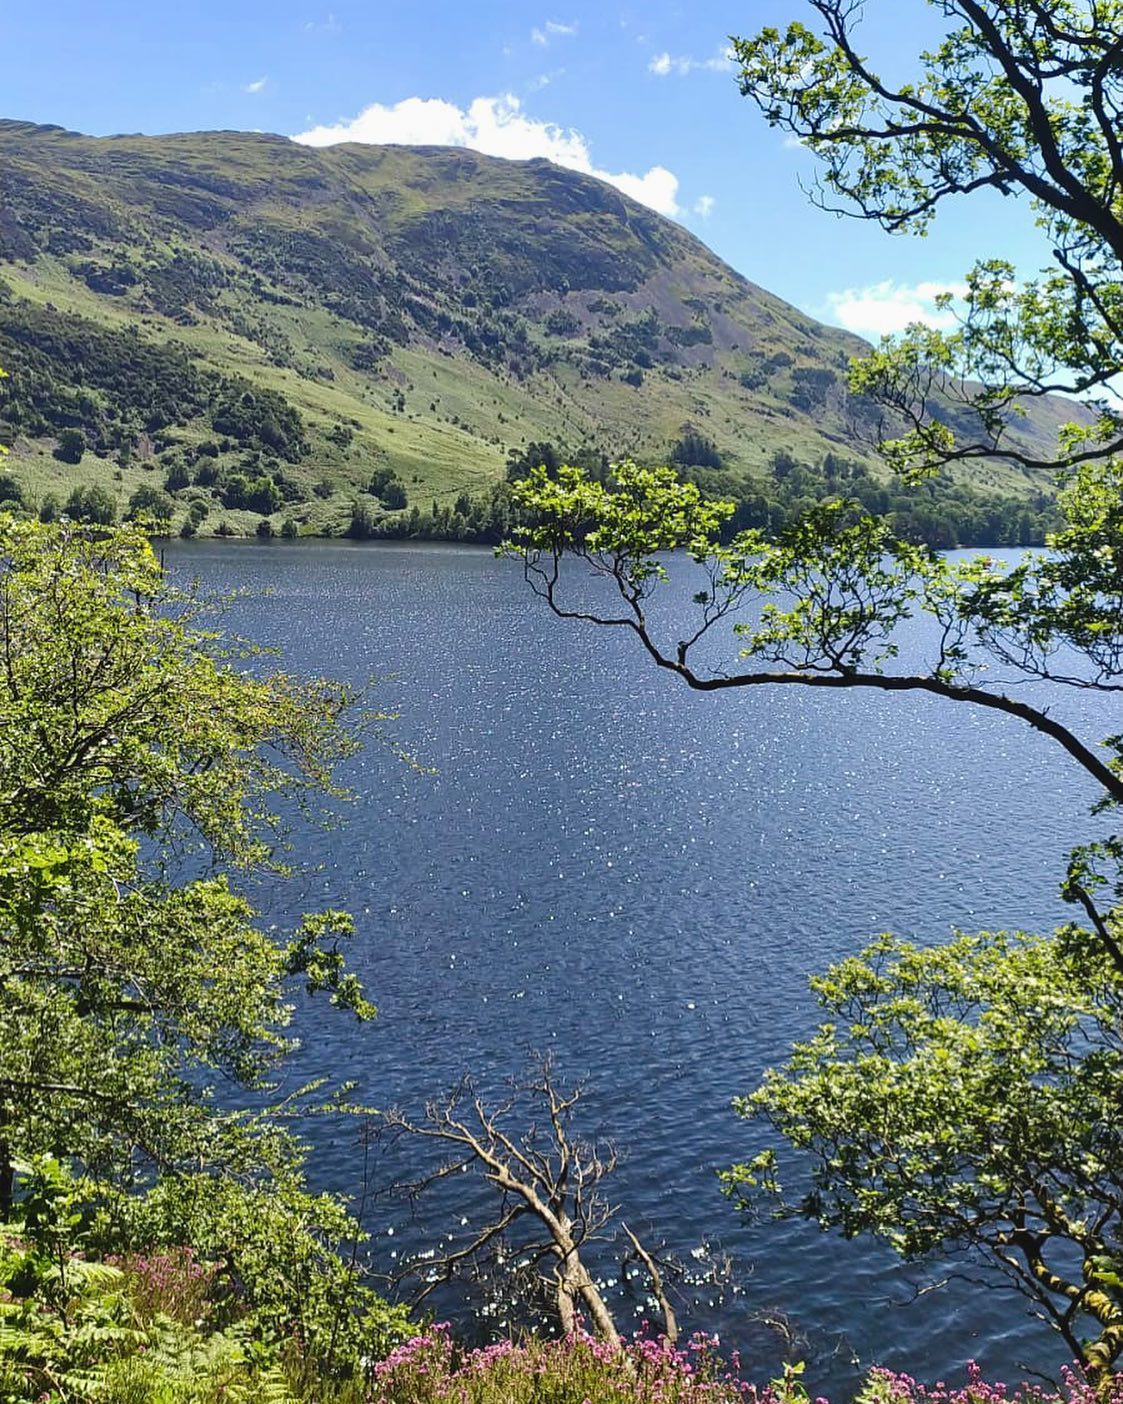 Ullswater in sparkling form on a DoE Gold expedition in the Lake District ⛰☀️⛰
.
.
.
#wildernessdevelopment #expeditions #navigationtraining #lovemyoffice #outdooroffice  #hikingadventures #ukhikingofficial #hiking #hikersuk #mapmyhike #outdoorhikingculture #mountainsfellsandhikes #dukeofedinburgh #dukeofedinburghaward #dukeofedinburghgold #dofe #dofegold #dofeaward #youthexpedition #outdooreducation #outdoorpursuits #outdooradventures #outdooractivities